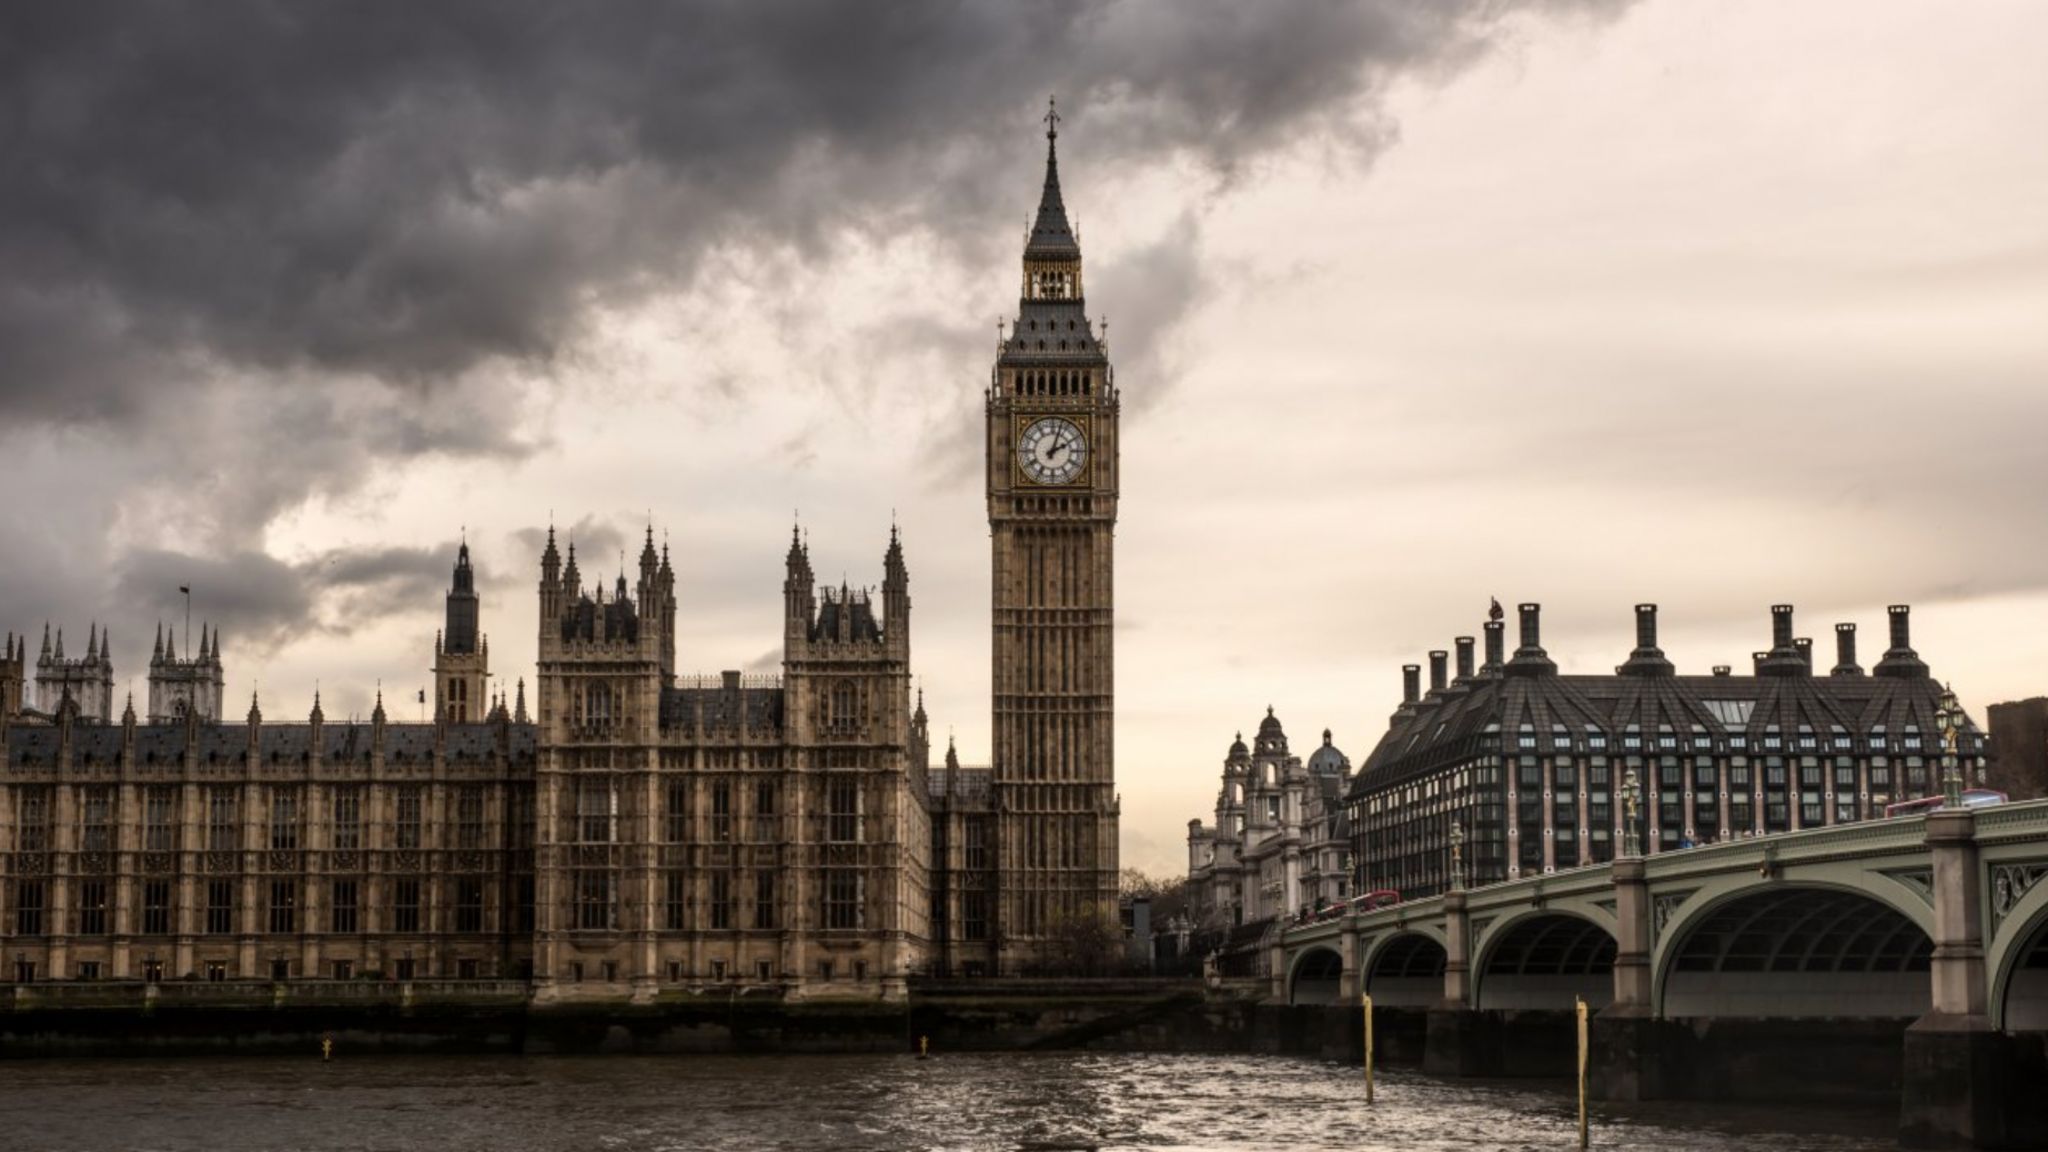 The Houses of Parliament and Big Ben under thick dark clouds.